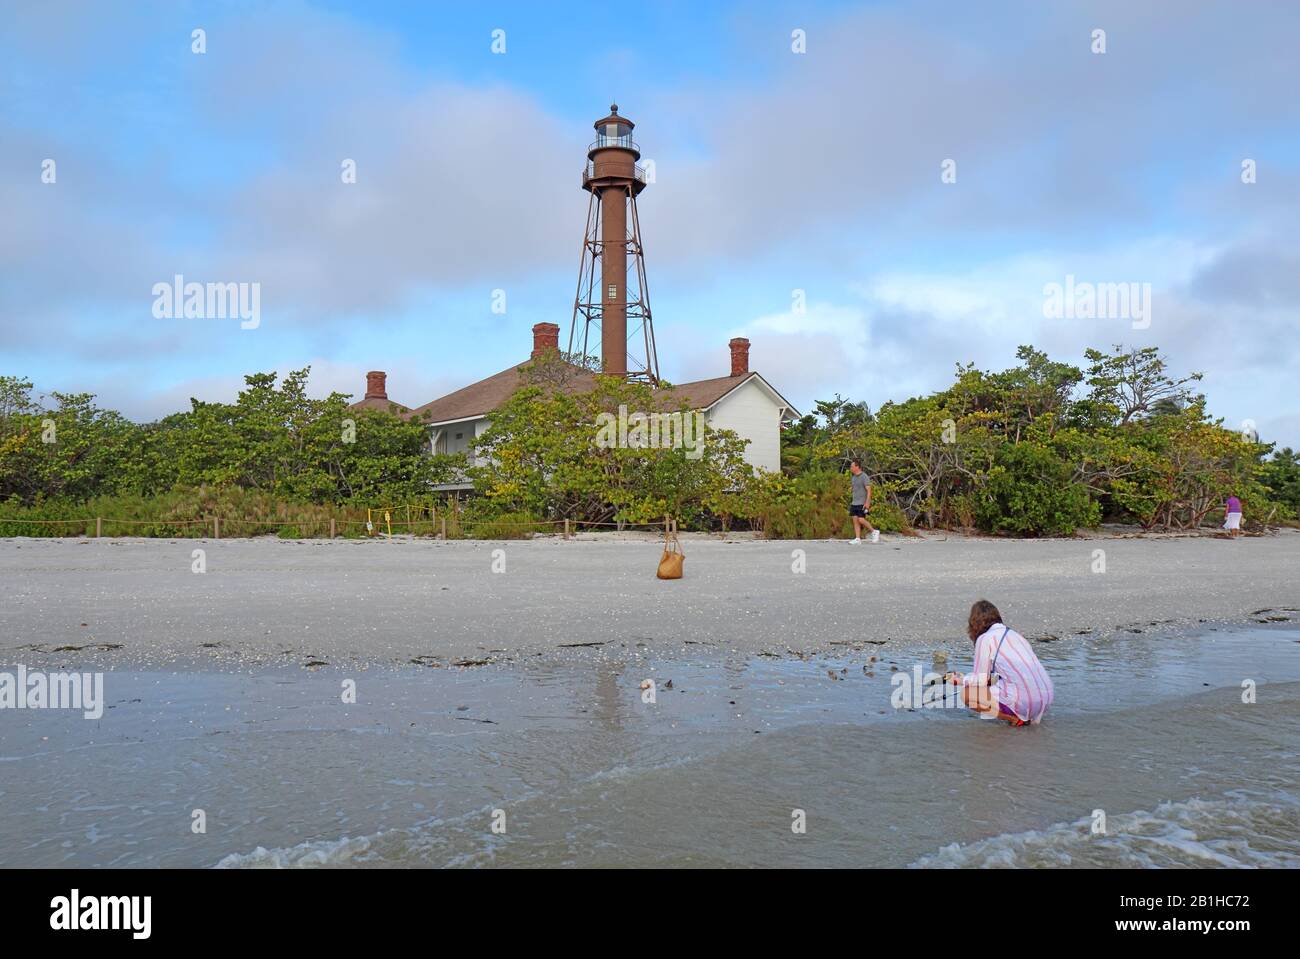 Shellers and beachcombers on Lighthouse Beach by the Sanibel Island or Point Ybel Light on Sanibel Island, Florida Stock Photo